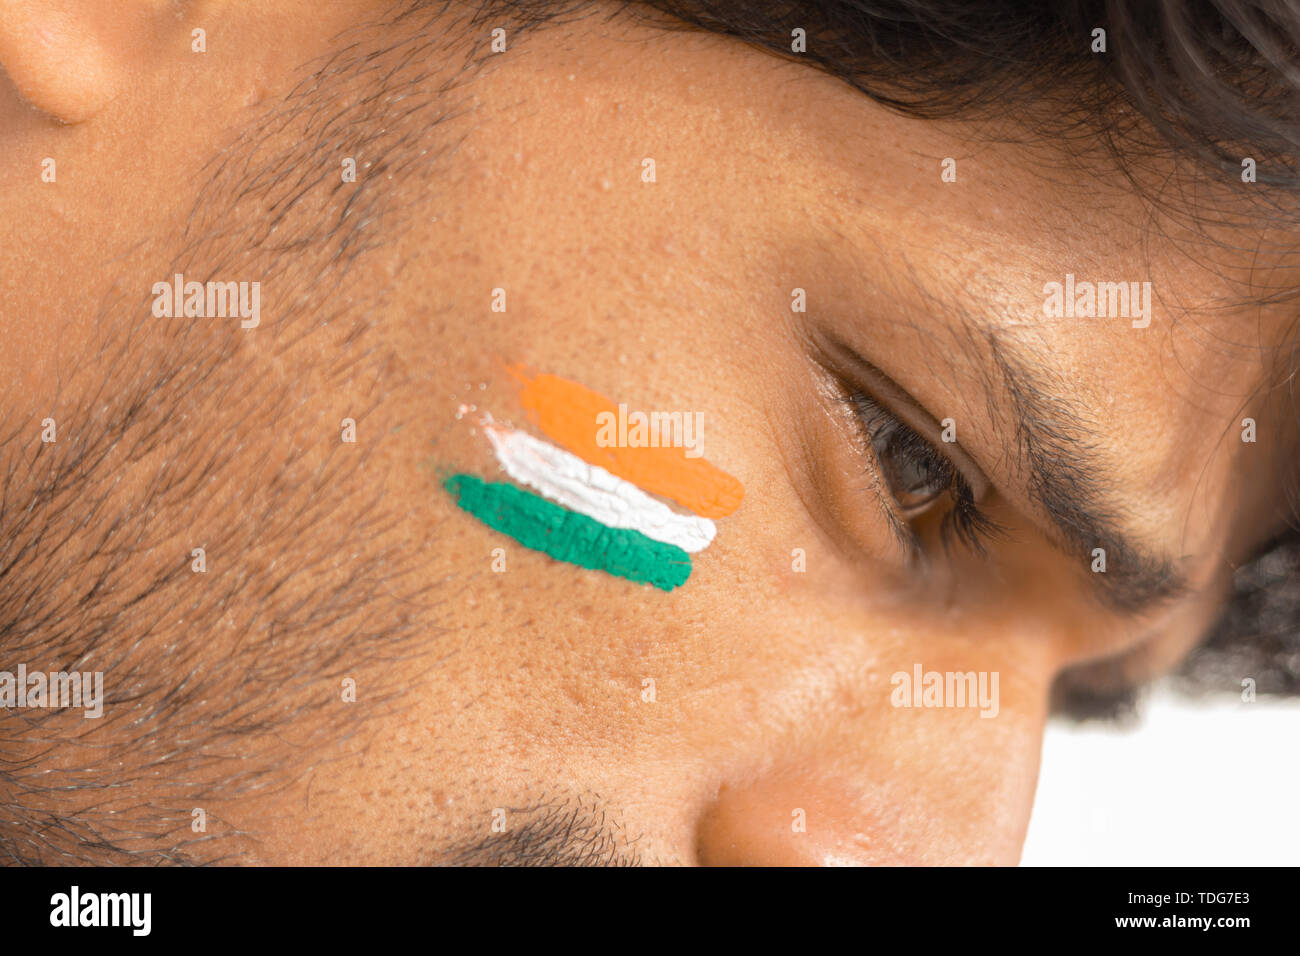 Closeup of a Tricolor Indian flag Painted on face to cheer India in cricket sports Stock Photo